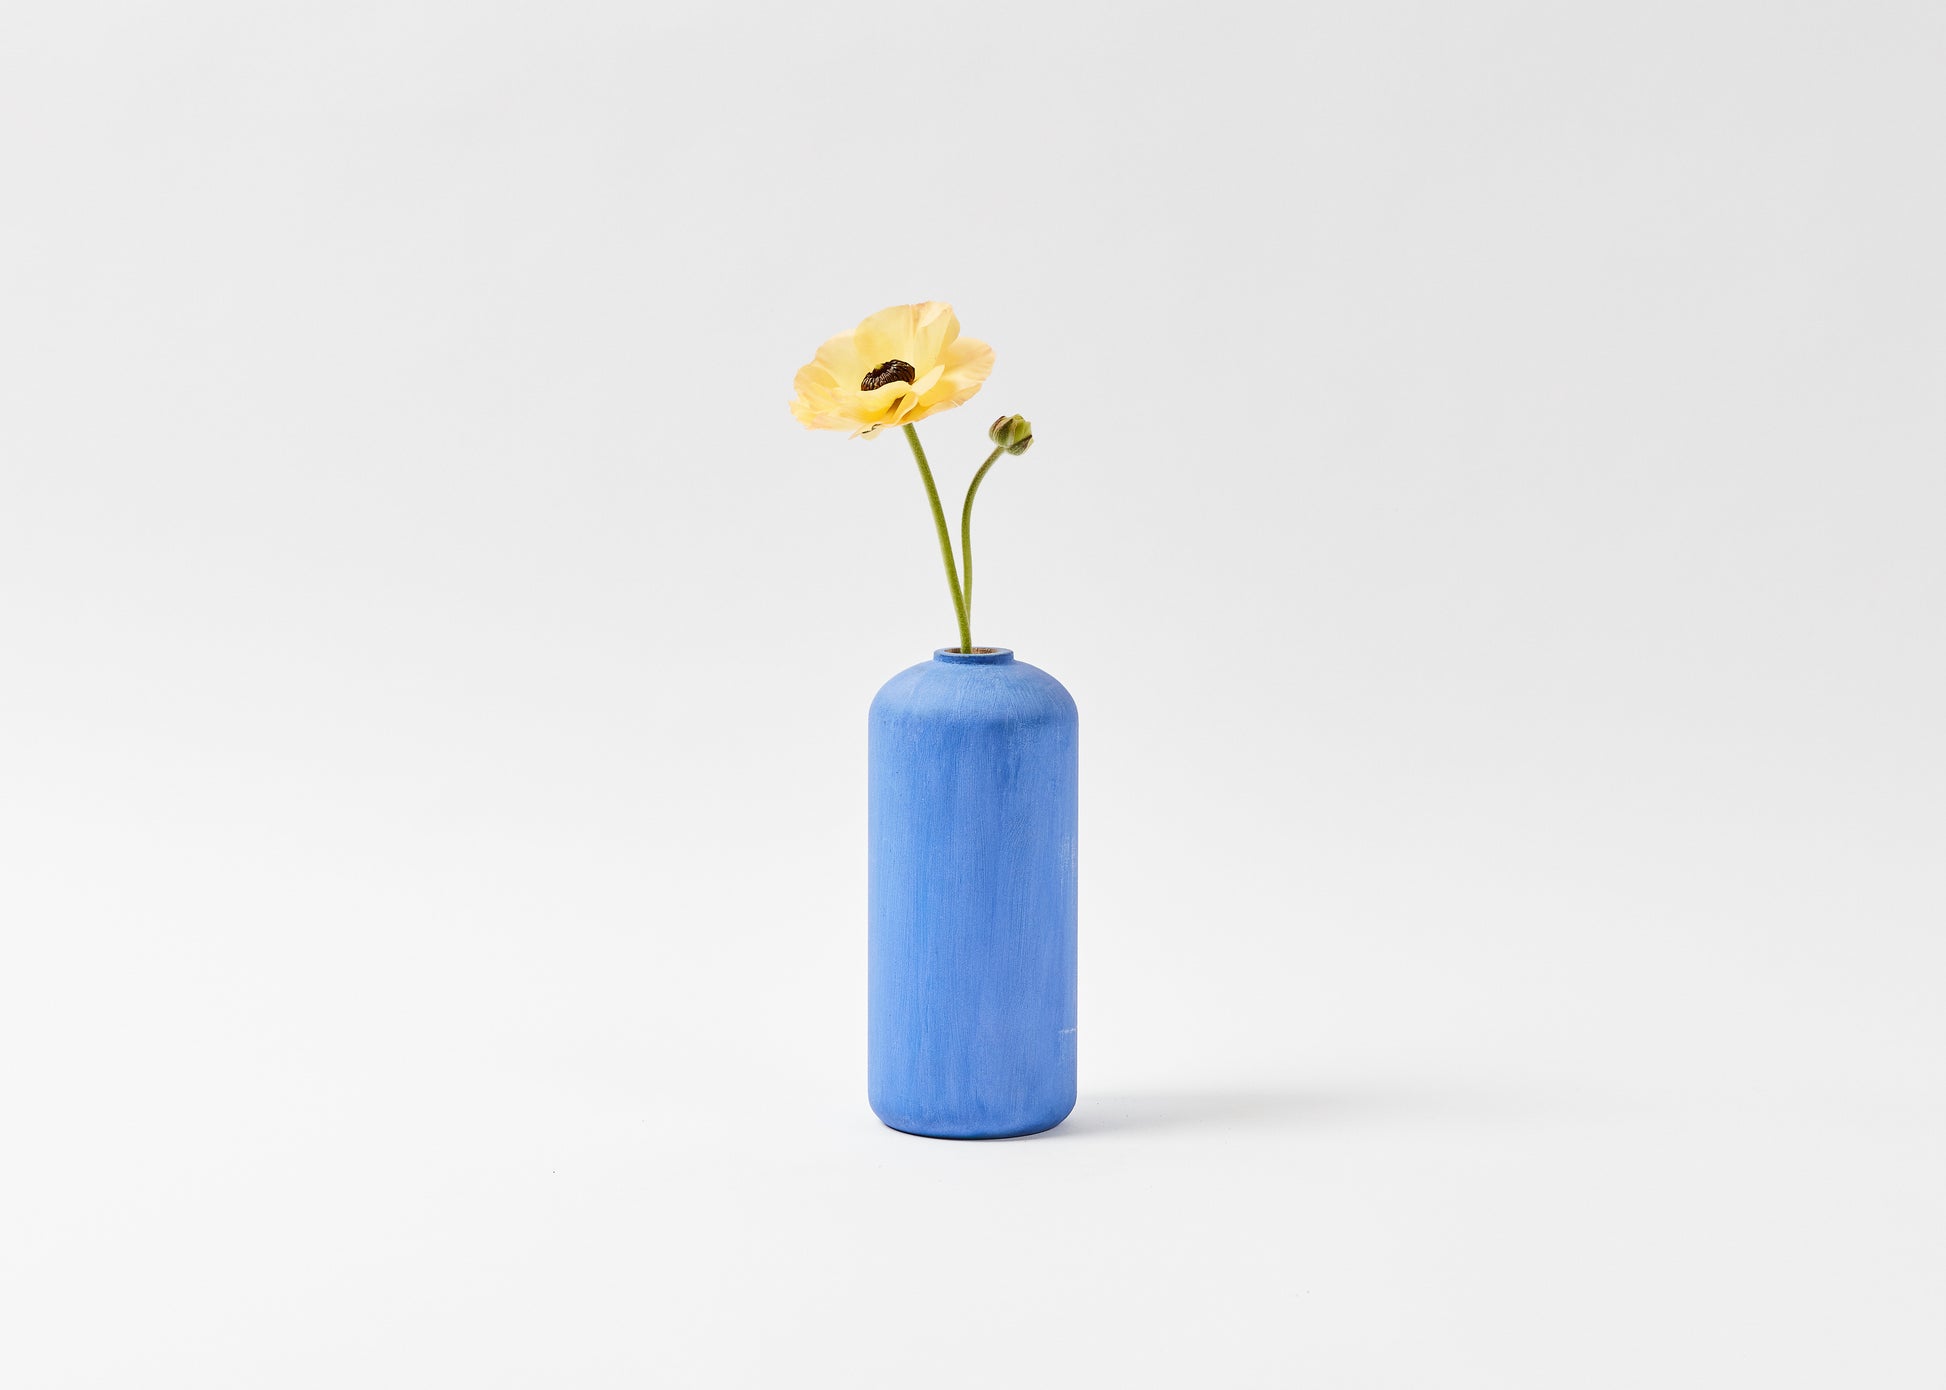 Tall Josef vase, hand painted in a cobalt blue. By Melanie Abrantes Designs.